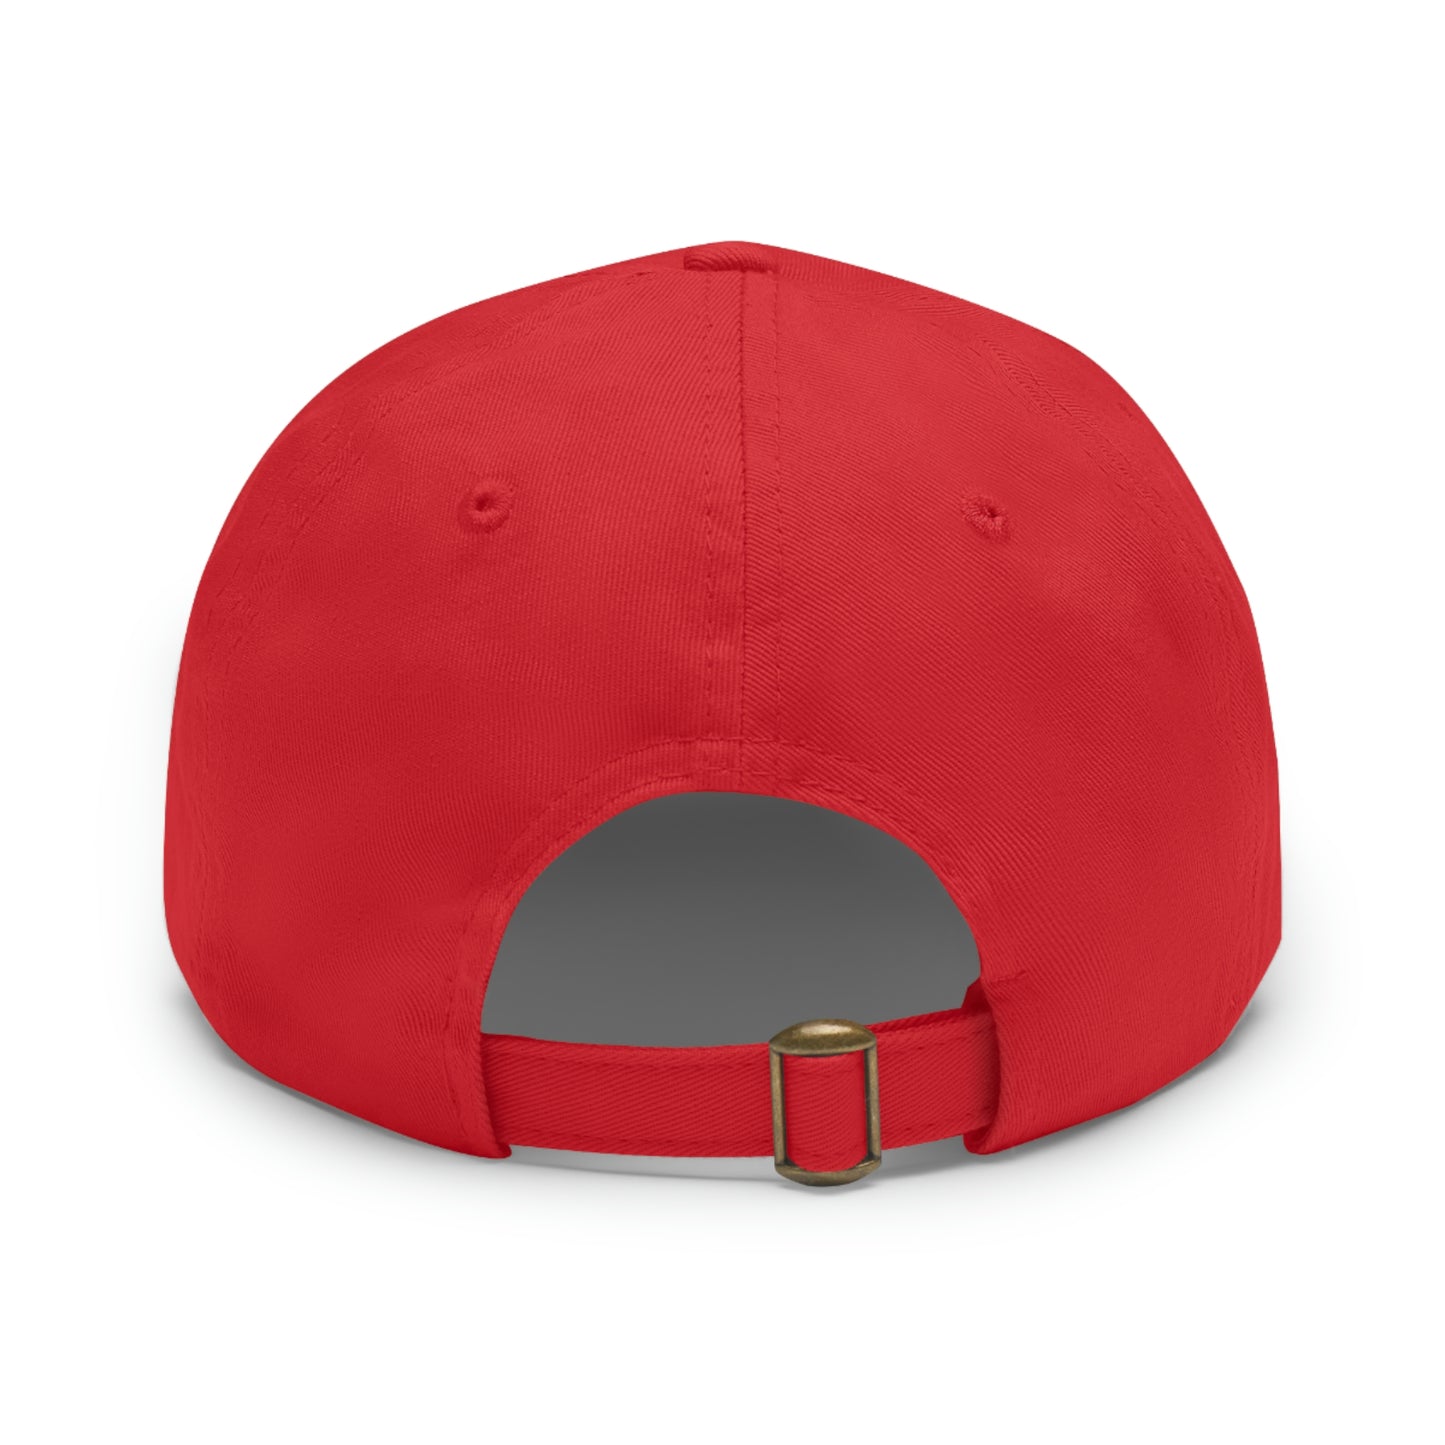 GRUMONH - Dad Hat with Leather Patch